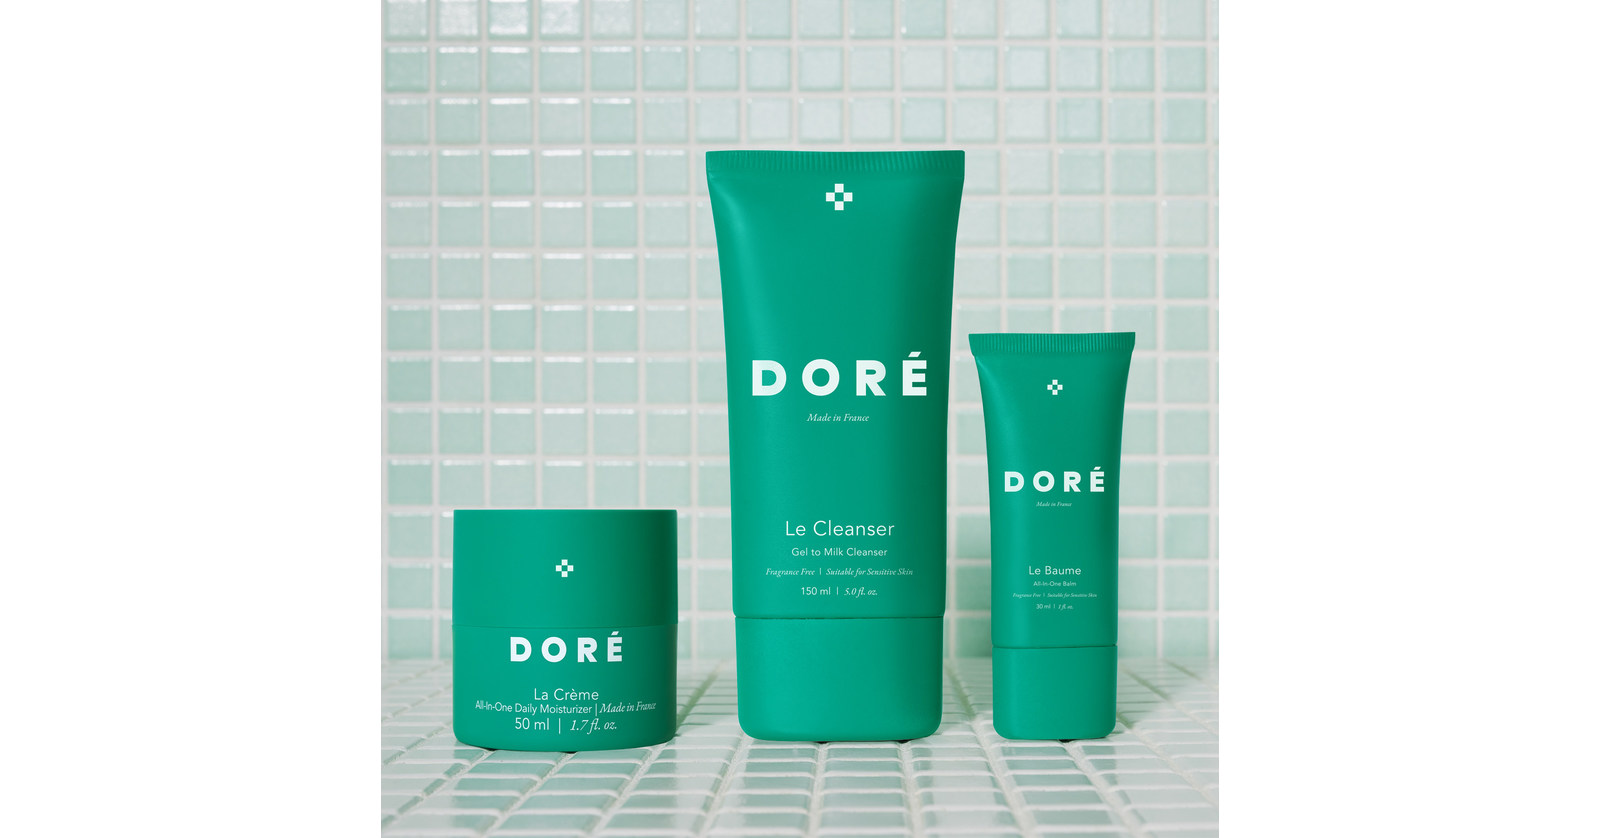 Garance Doré, the Lifestyle Media Powerhouse and NY Times Best Selling Author Announces Made in France Skincare Line, Doré